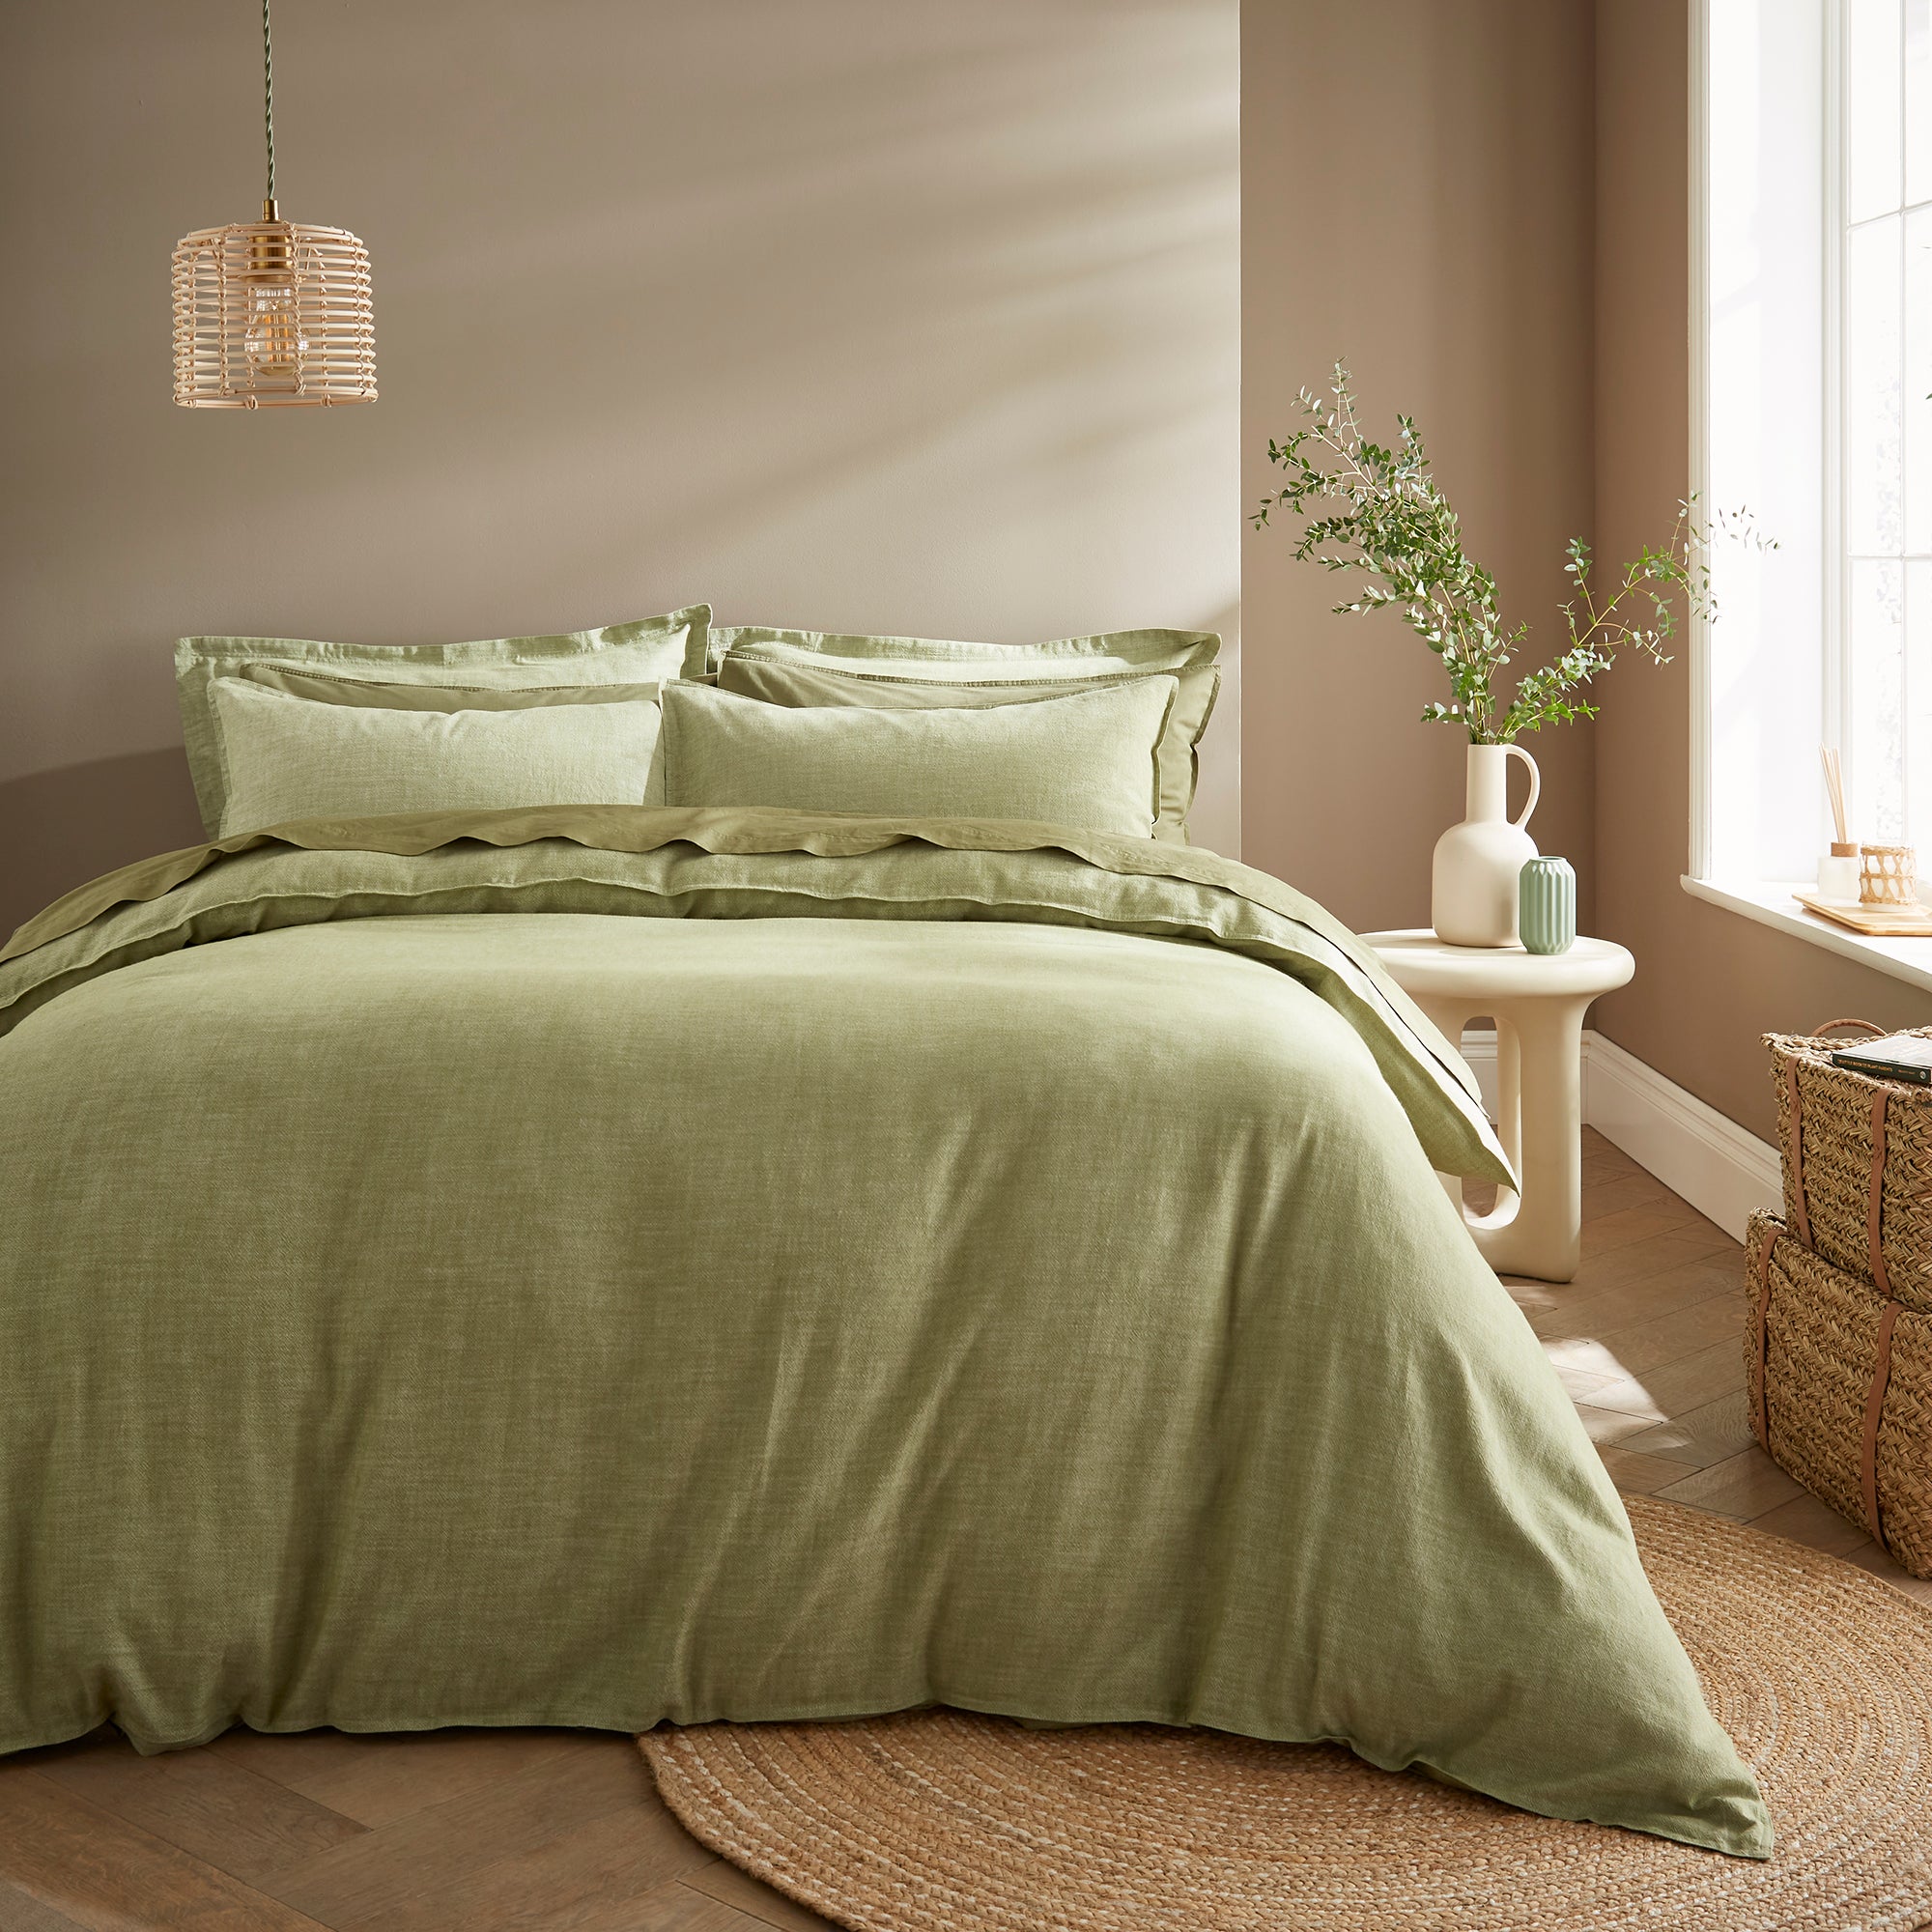 Lechlade Olive Cotton Duvet Cover and Pillowcase Set